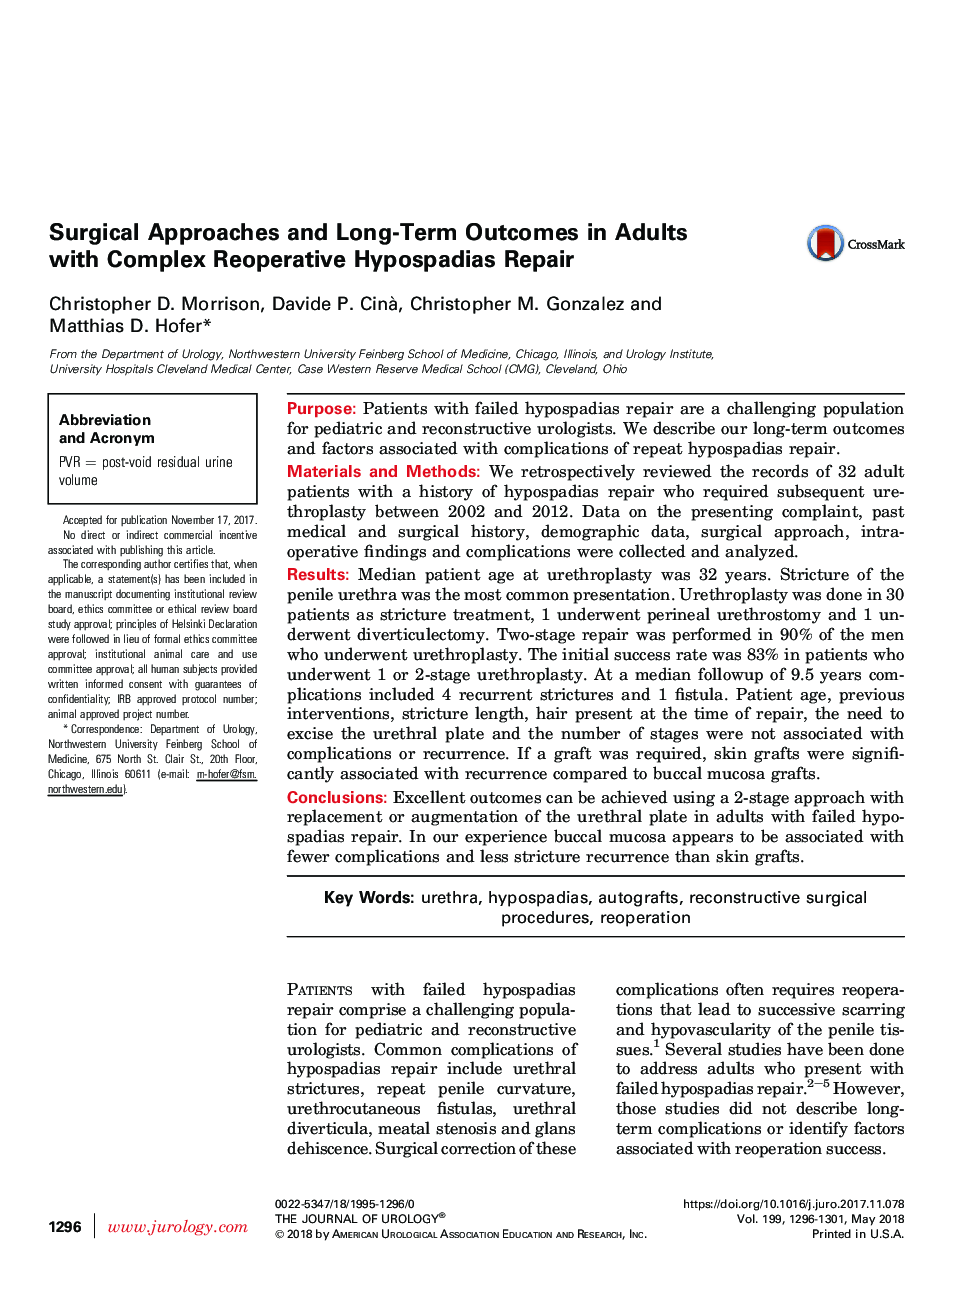 Surgical Approaches And Long Term Outcomes In Adults With Complex Reoperative Hypospadias Repair